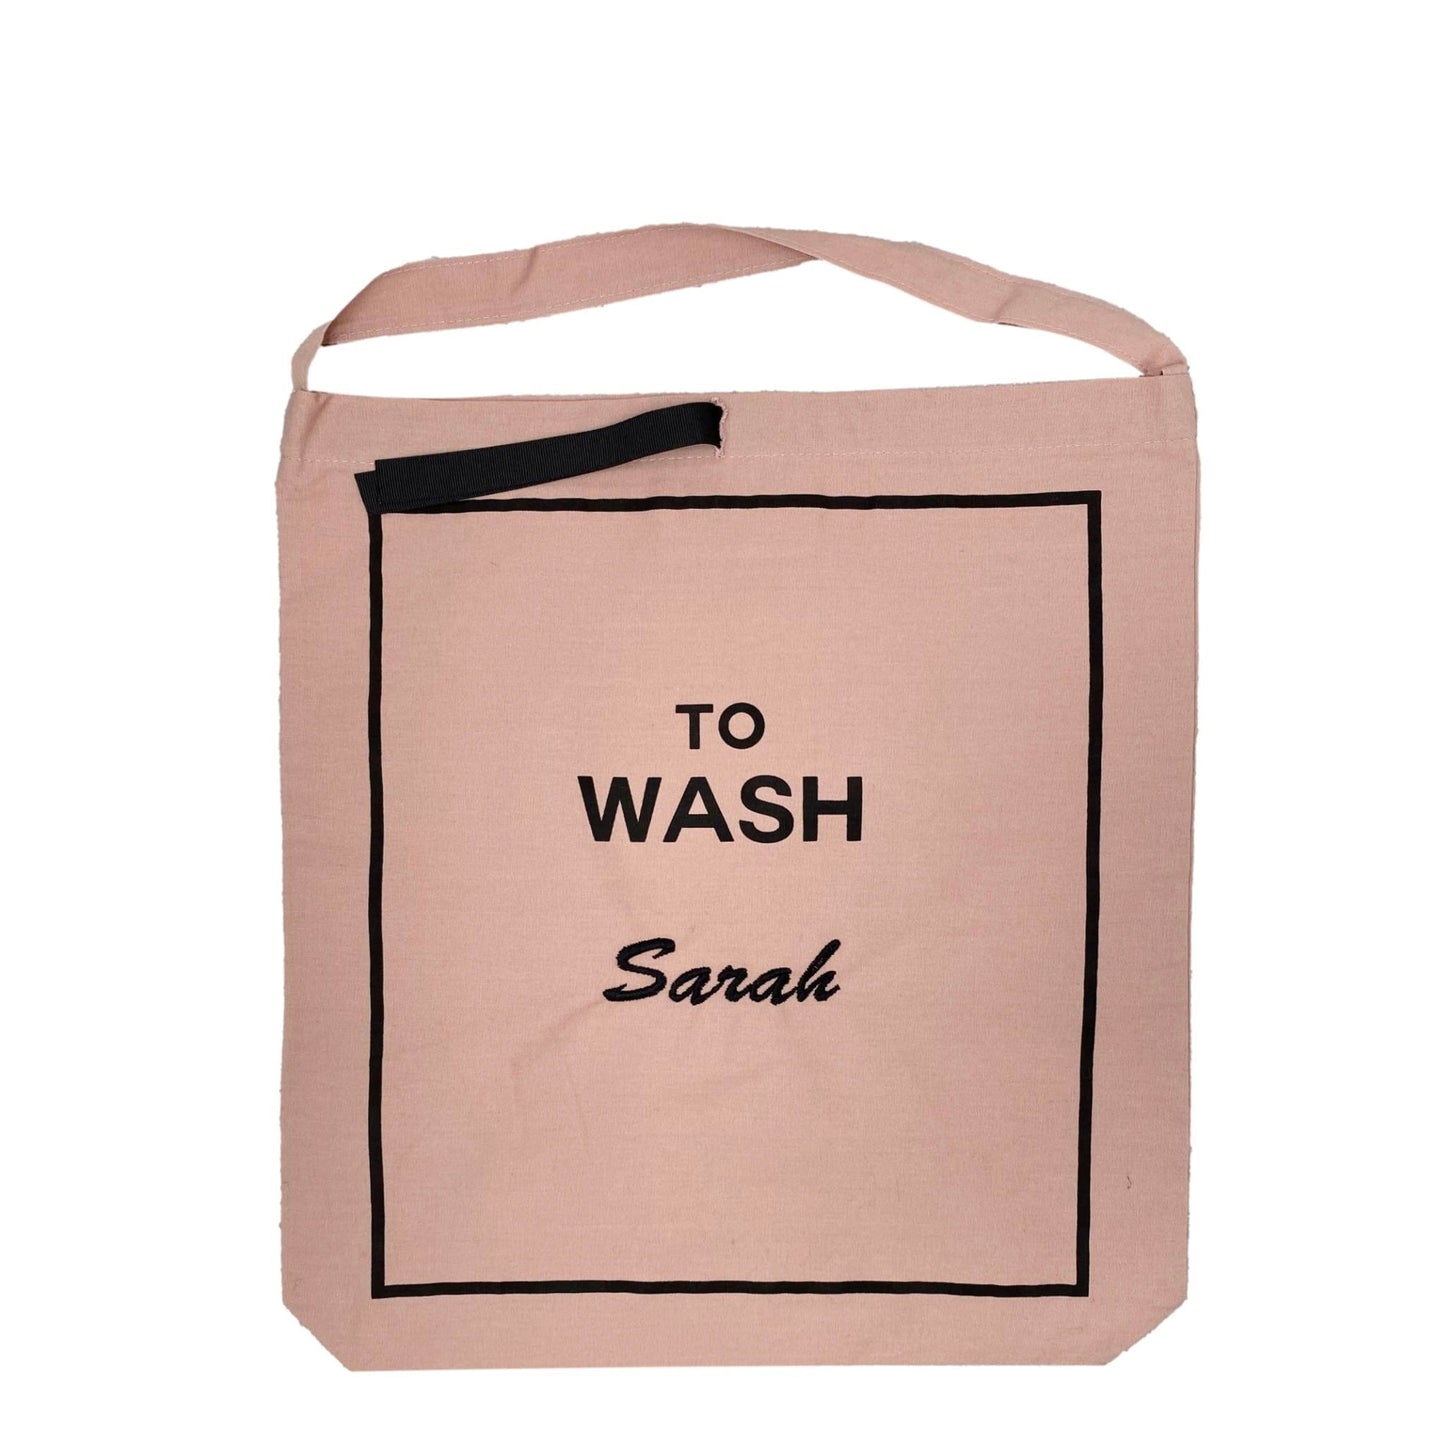 To Wash Natural Cotton Laundry Bag Pink